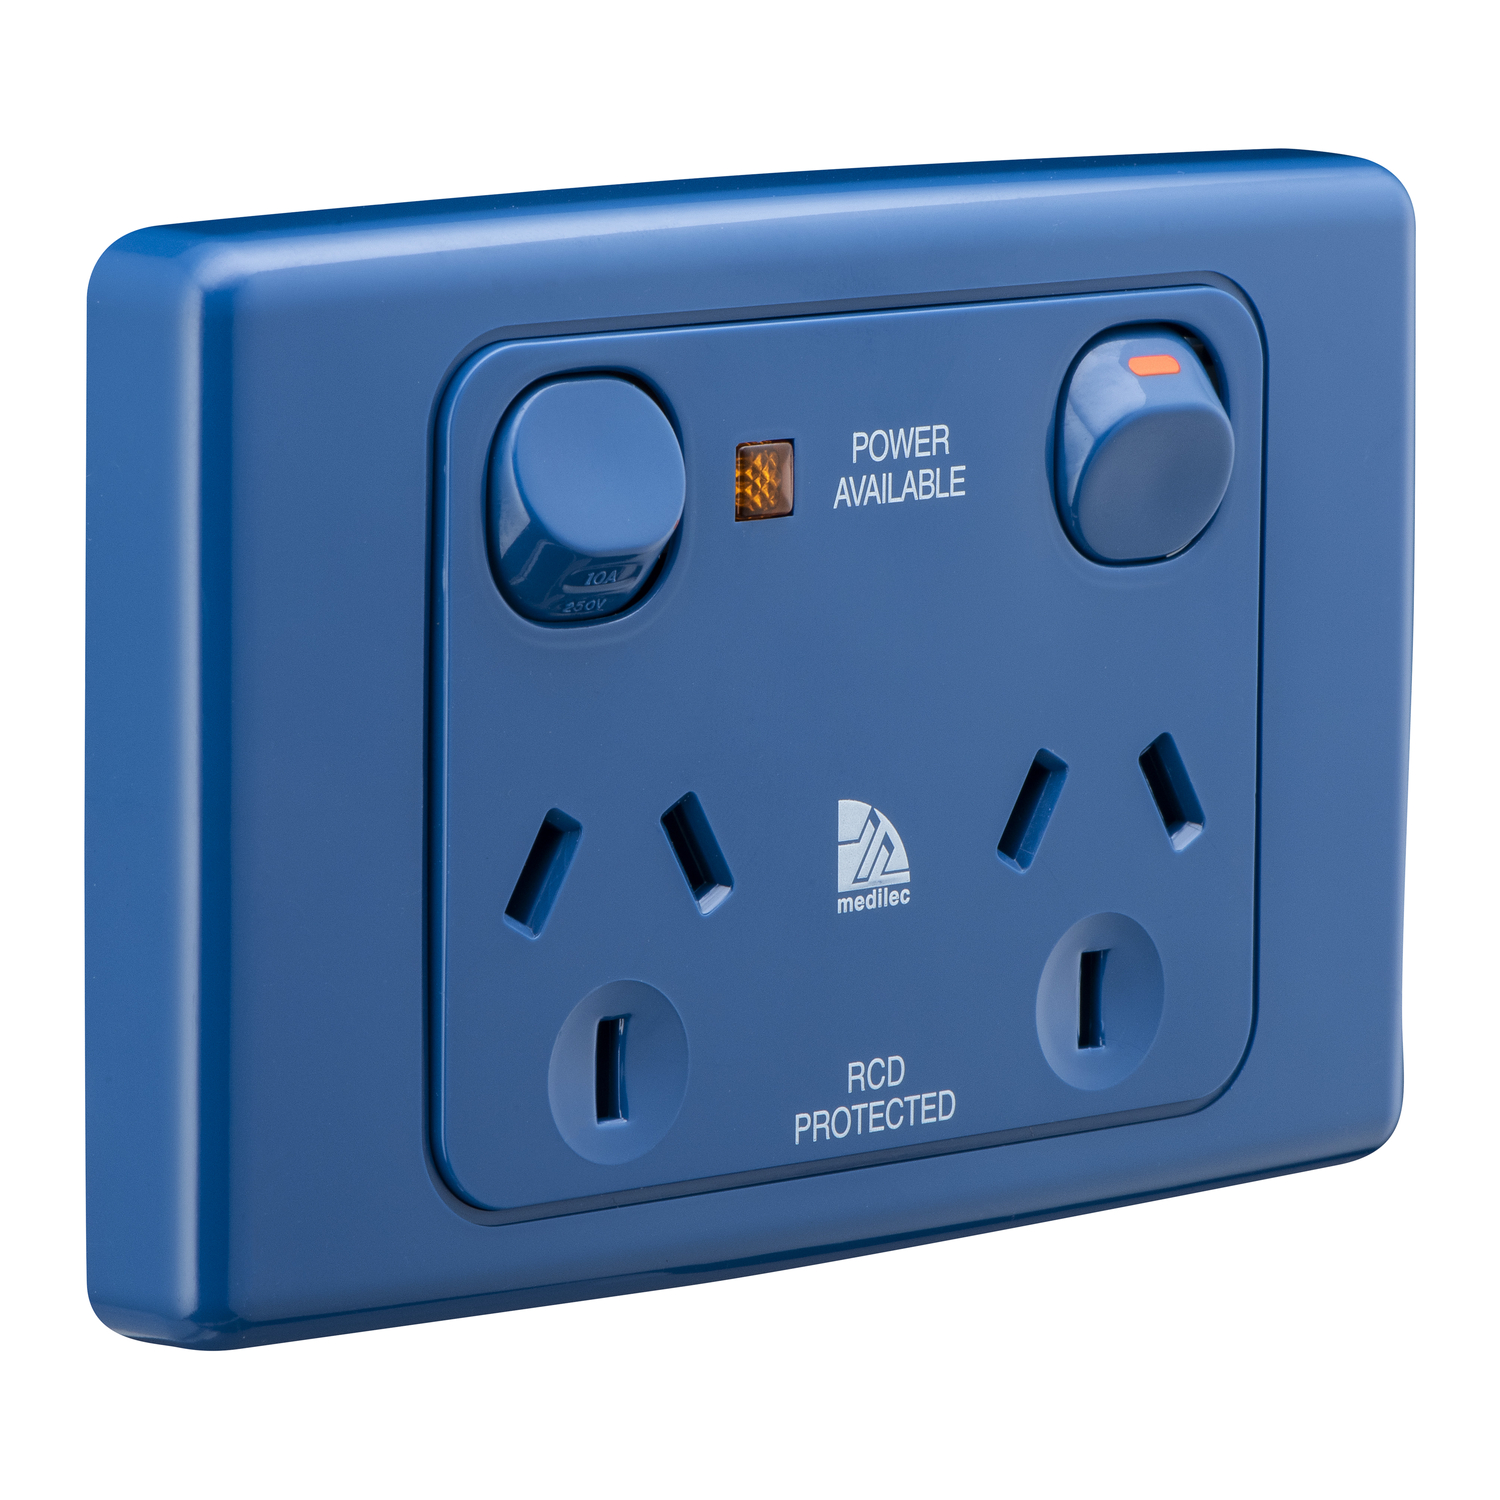 Socket Outlets Switch Horizontal, Power Indicator and RCD Label